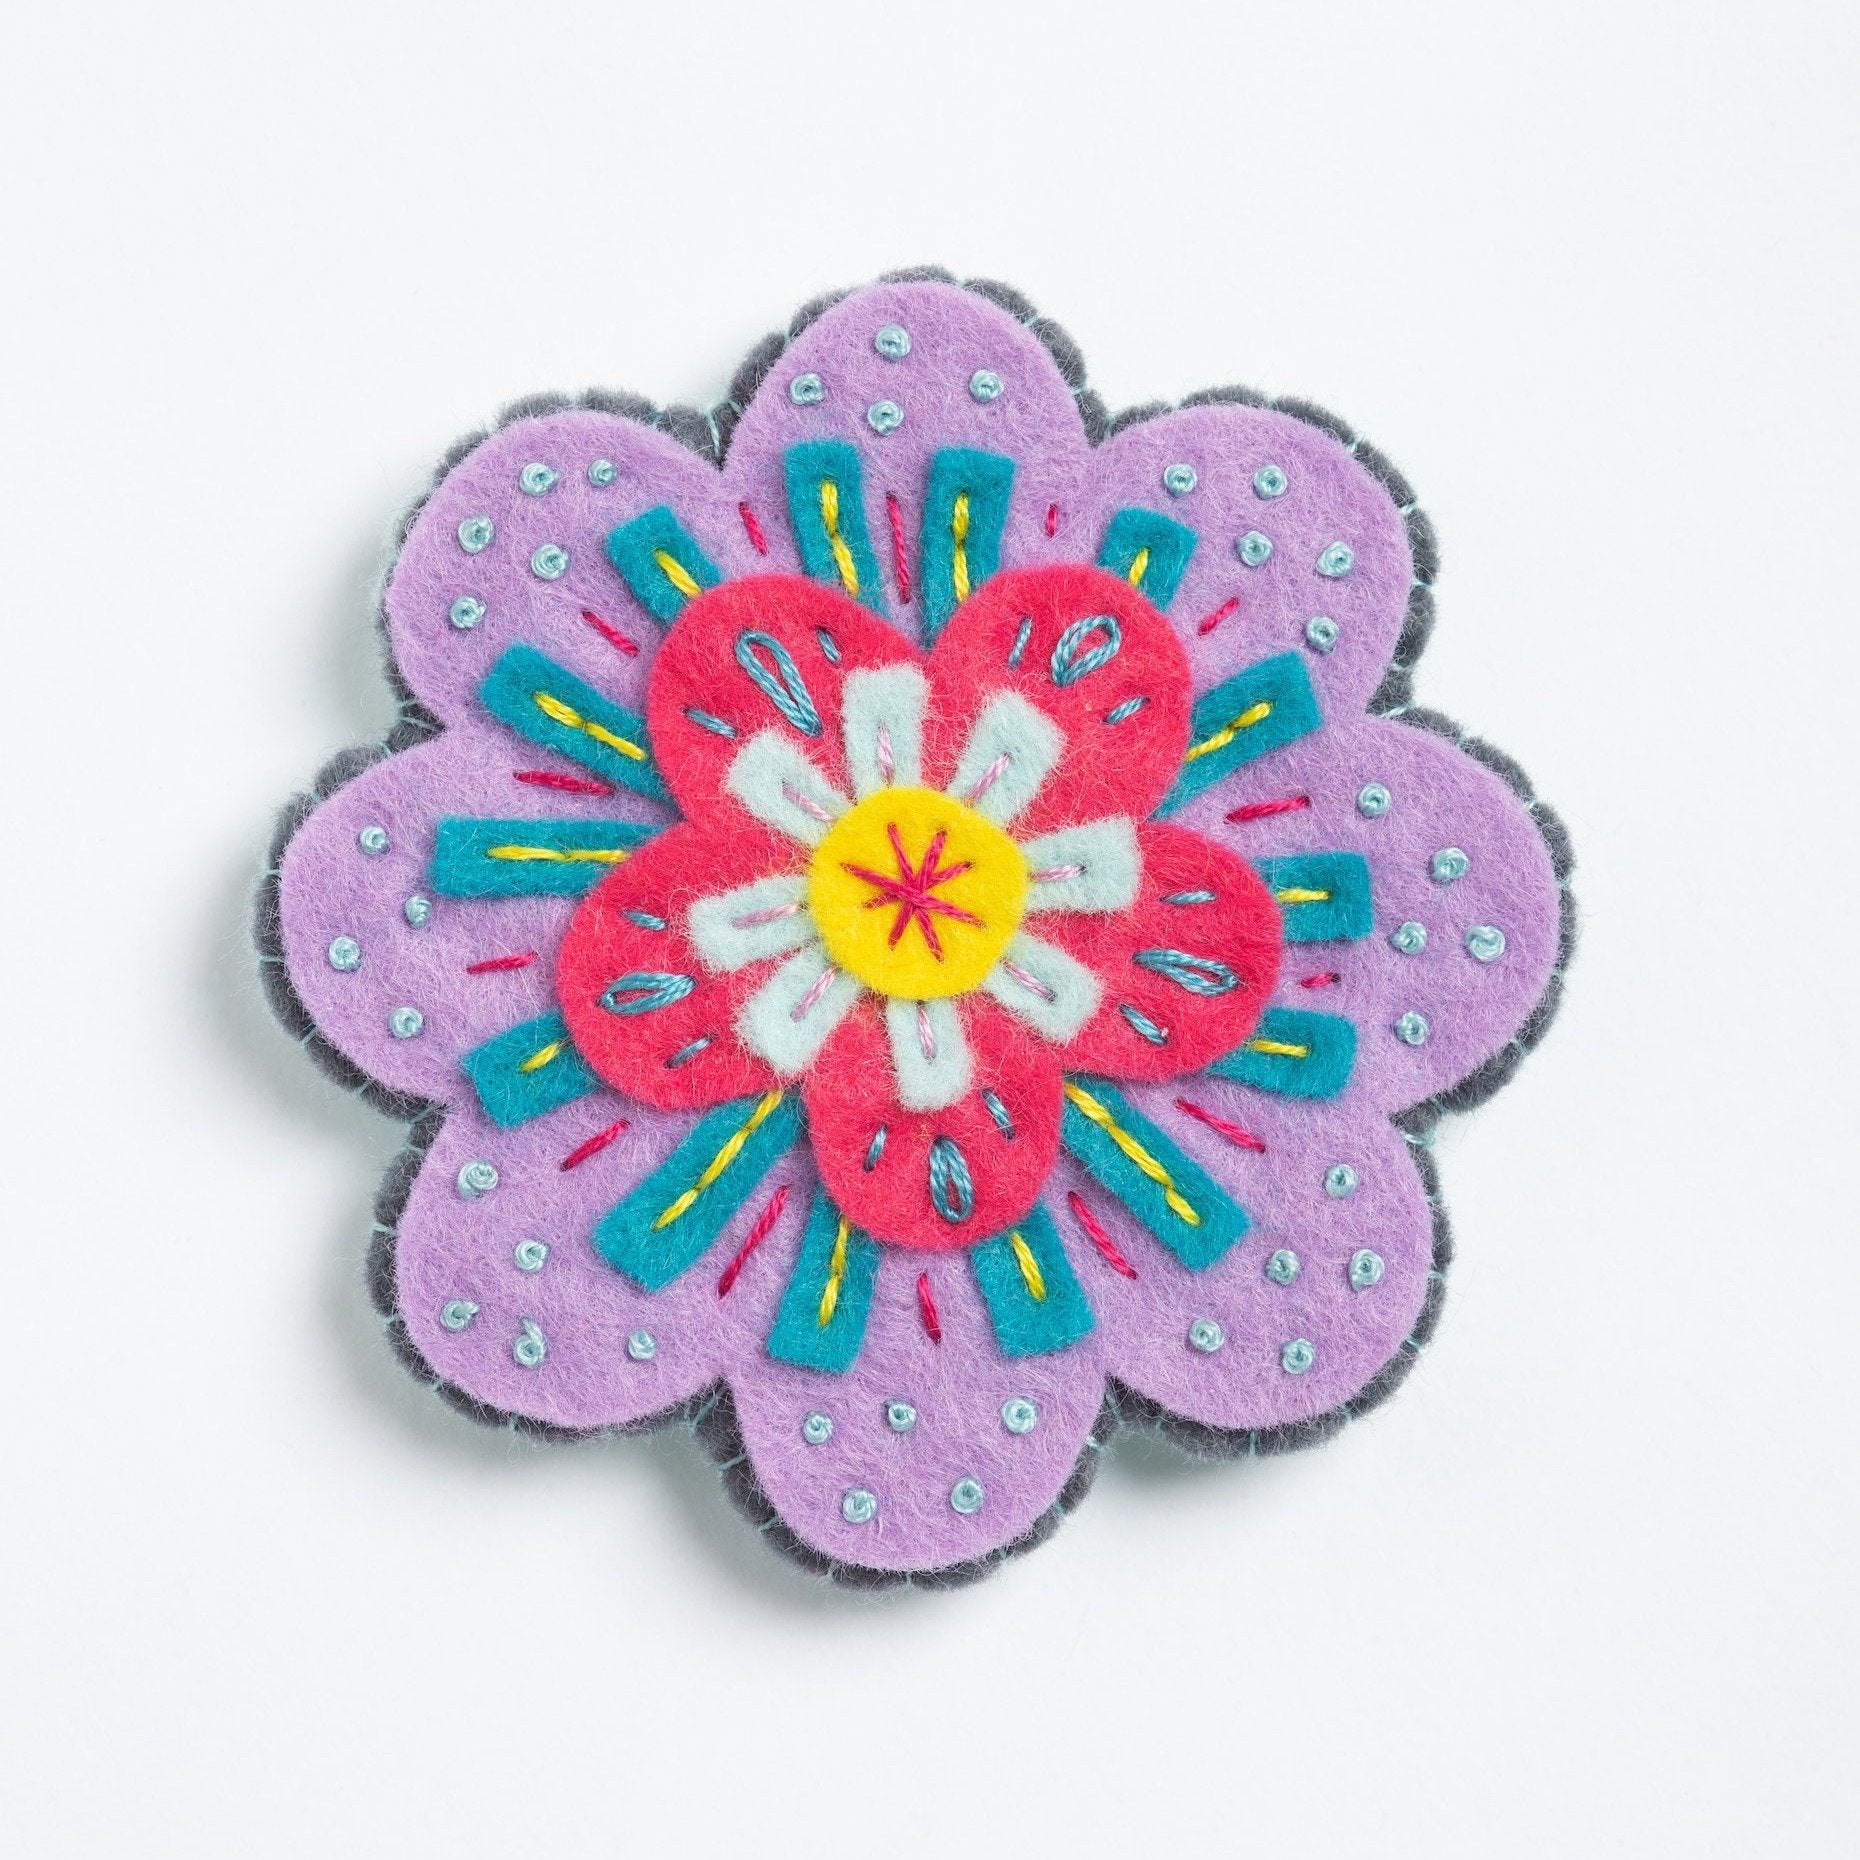 Clipped image of beatrix flower brooch on white background.